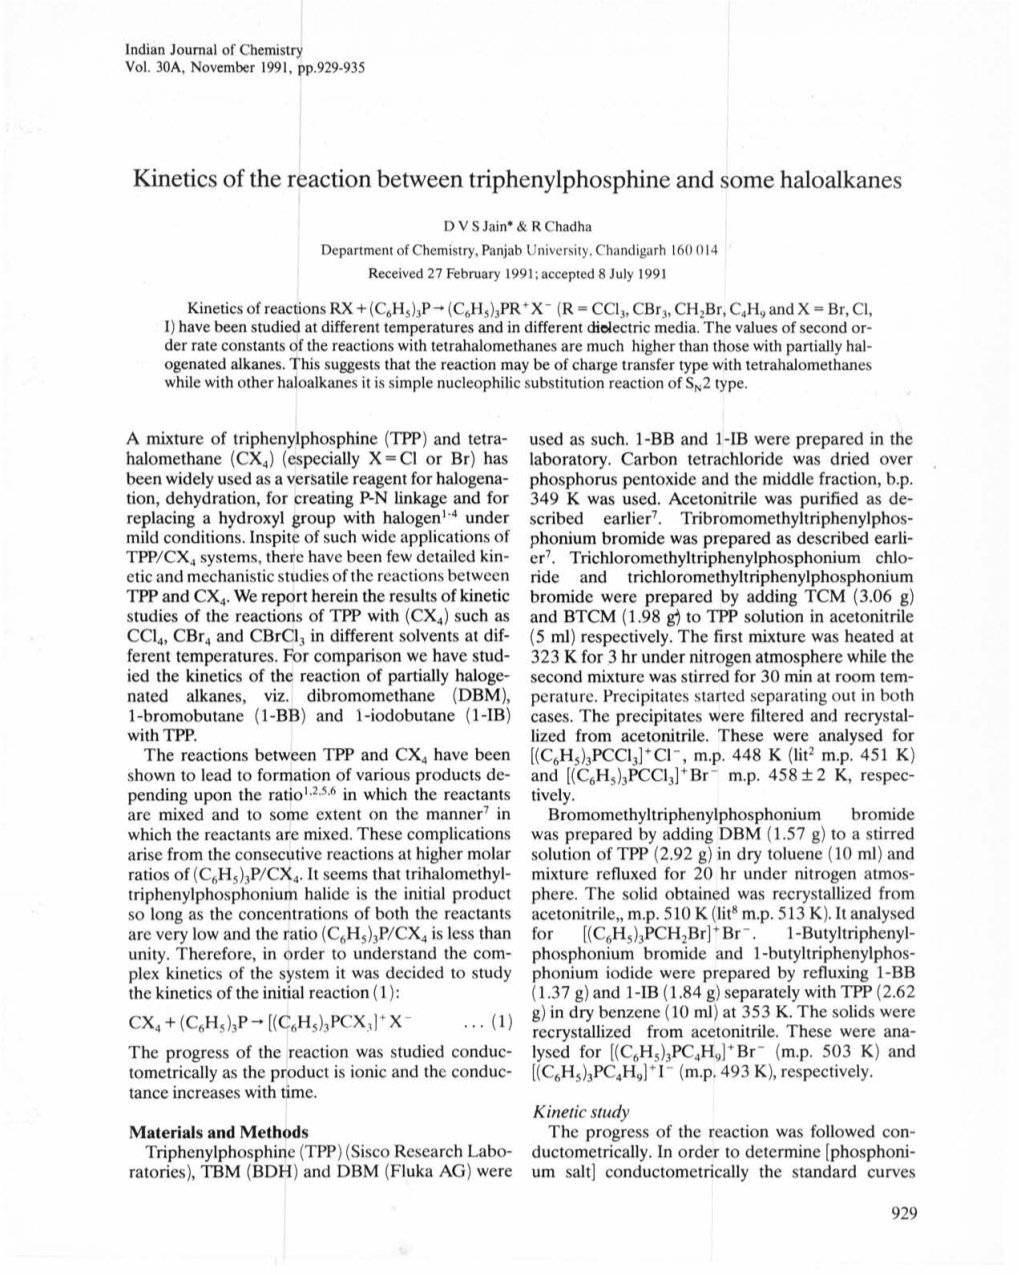 Kinetics of the Reaction Between Triphenylphosphine and Some Haloalkanes